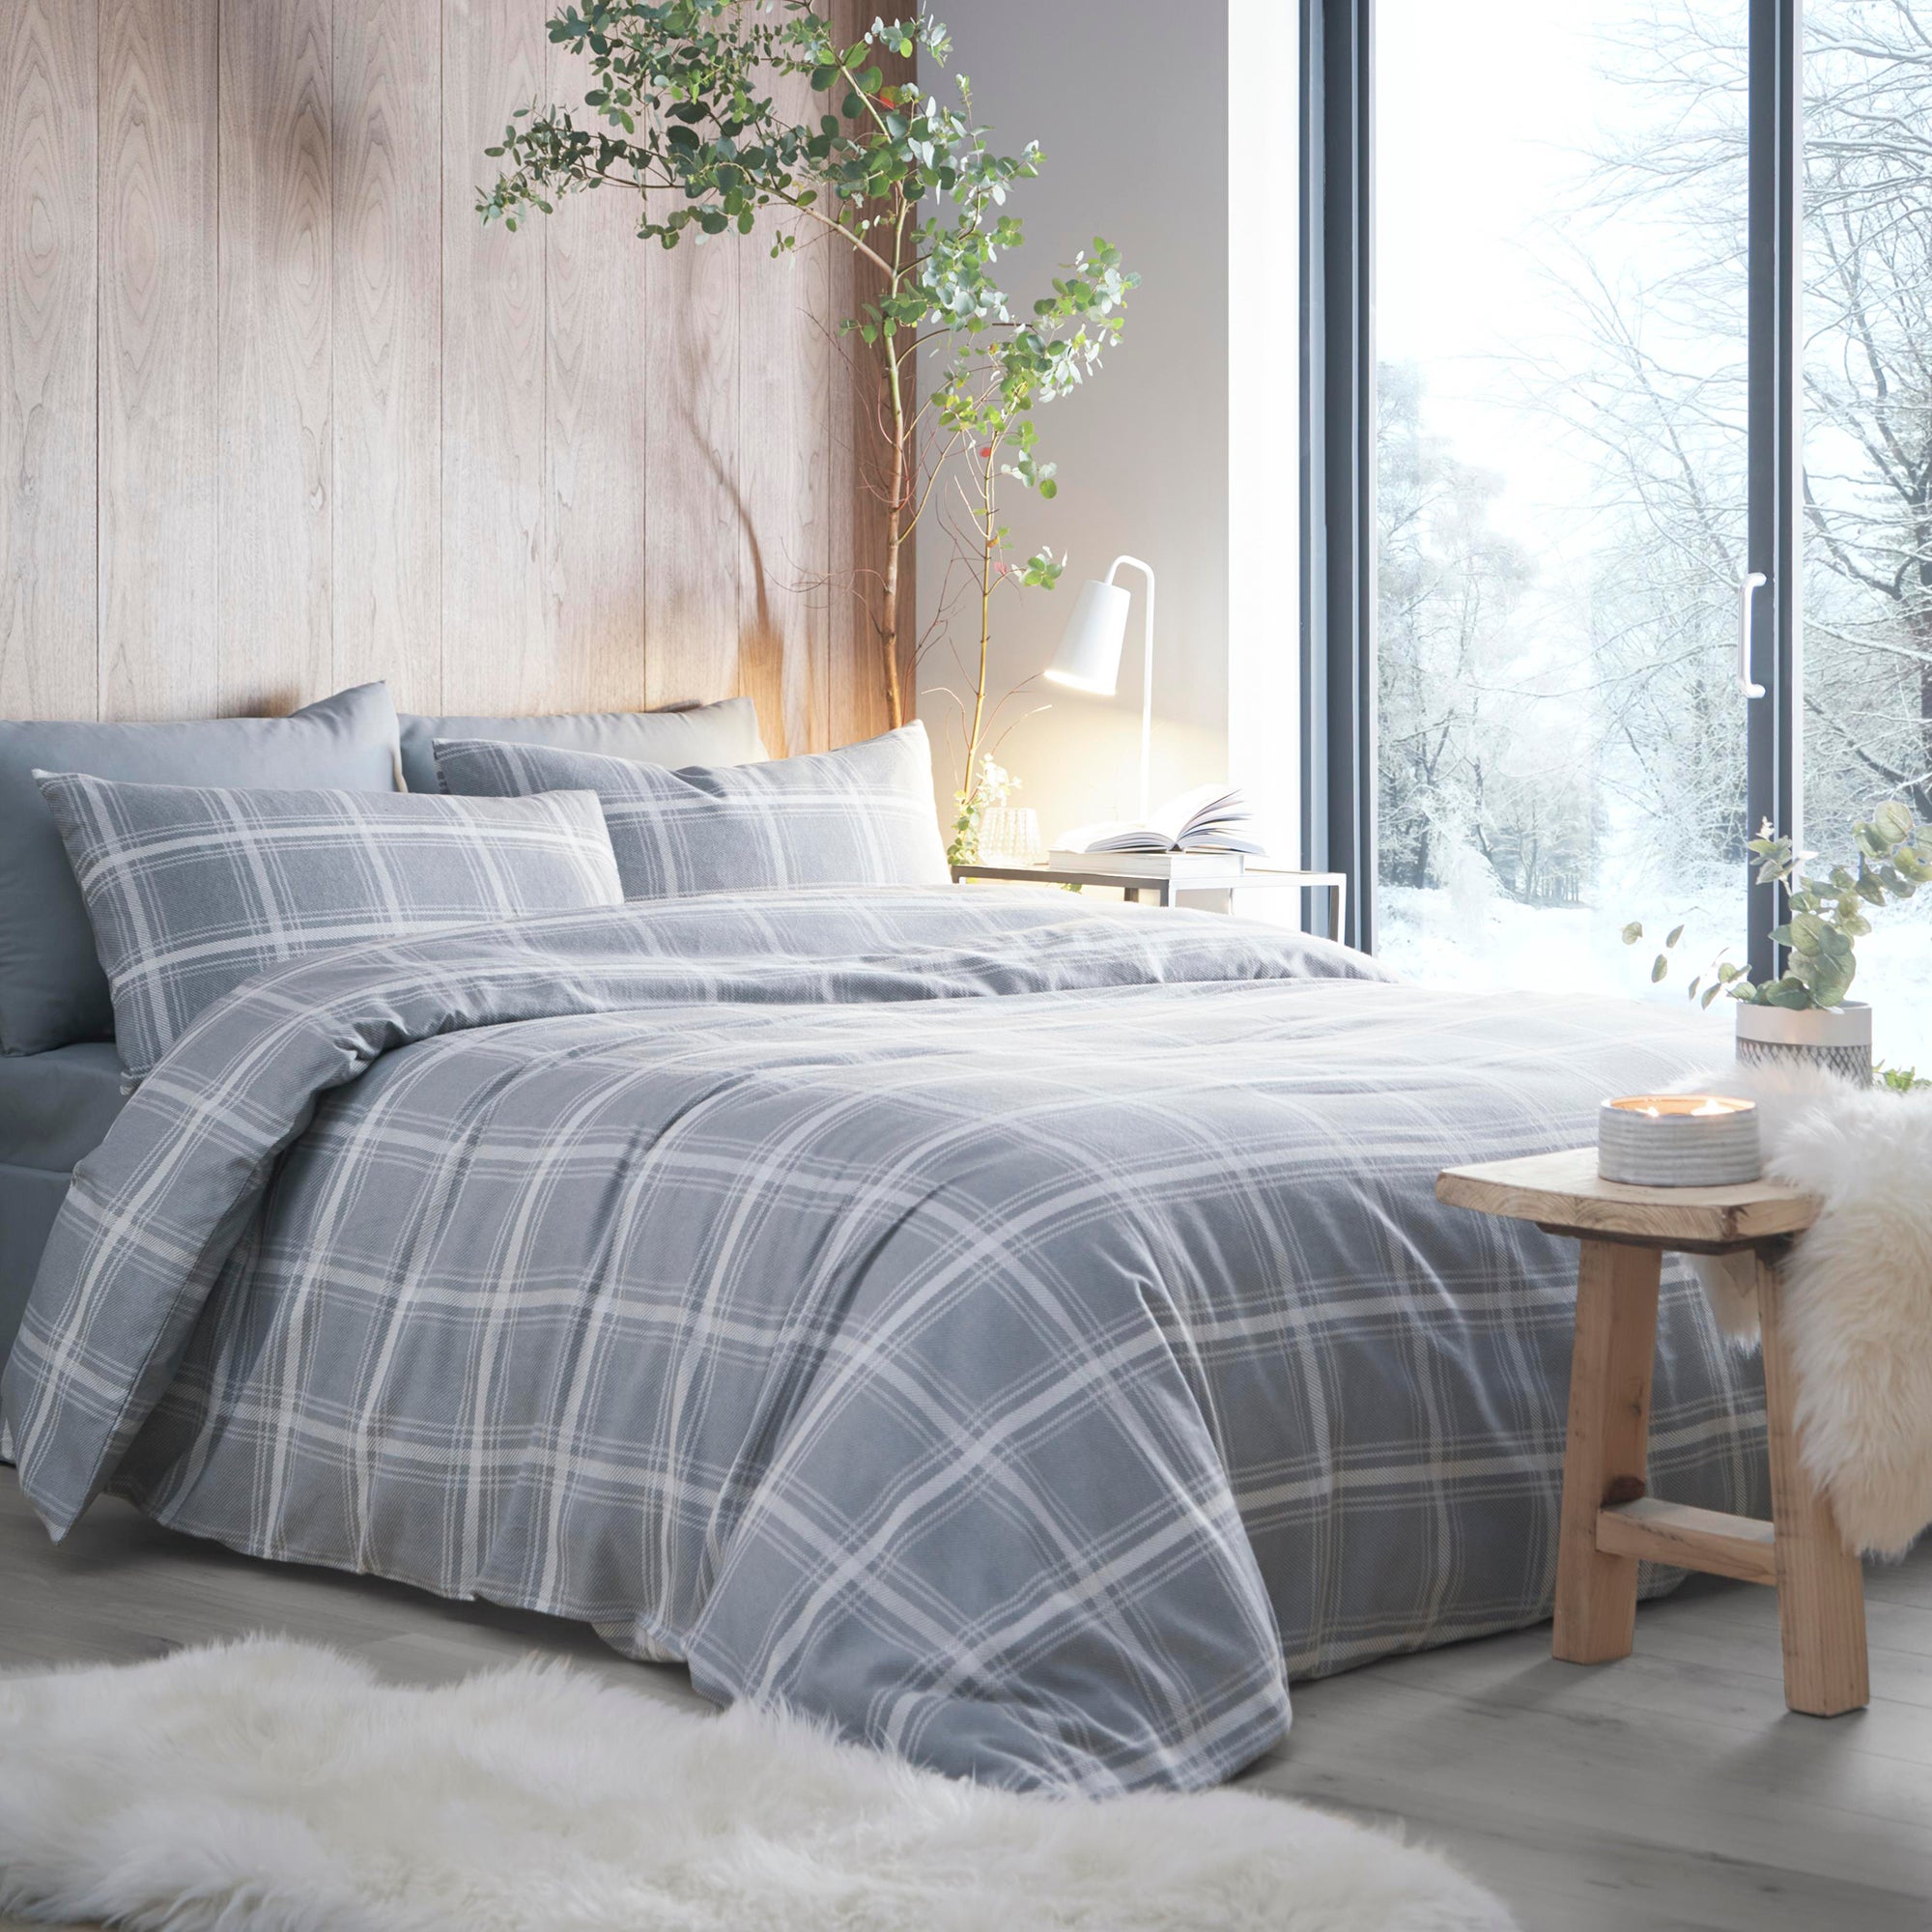 Aviemore Checked Duvet Cover And Pillowcase Set Silver Silver